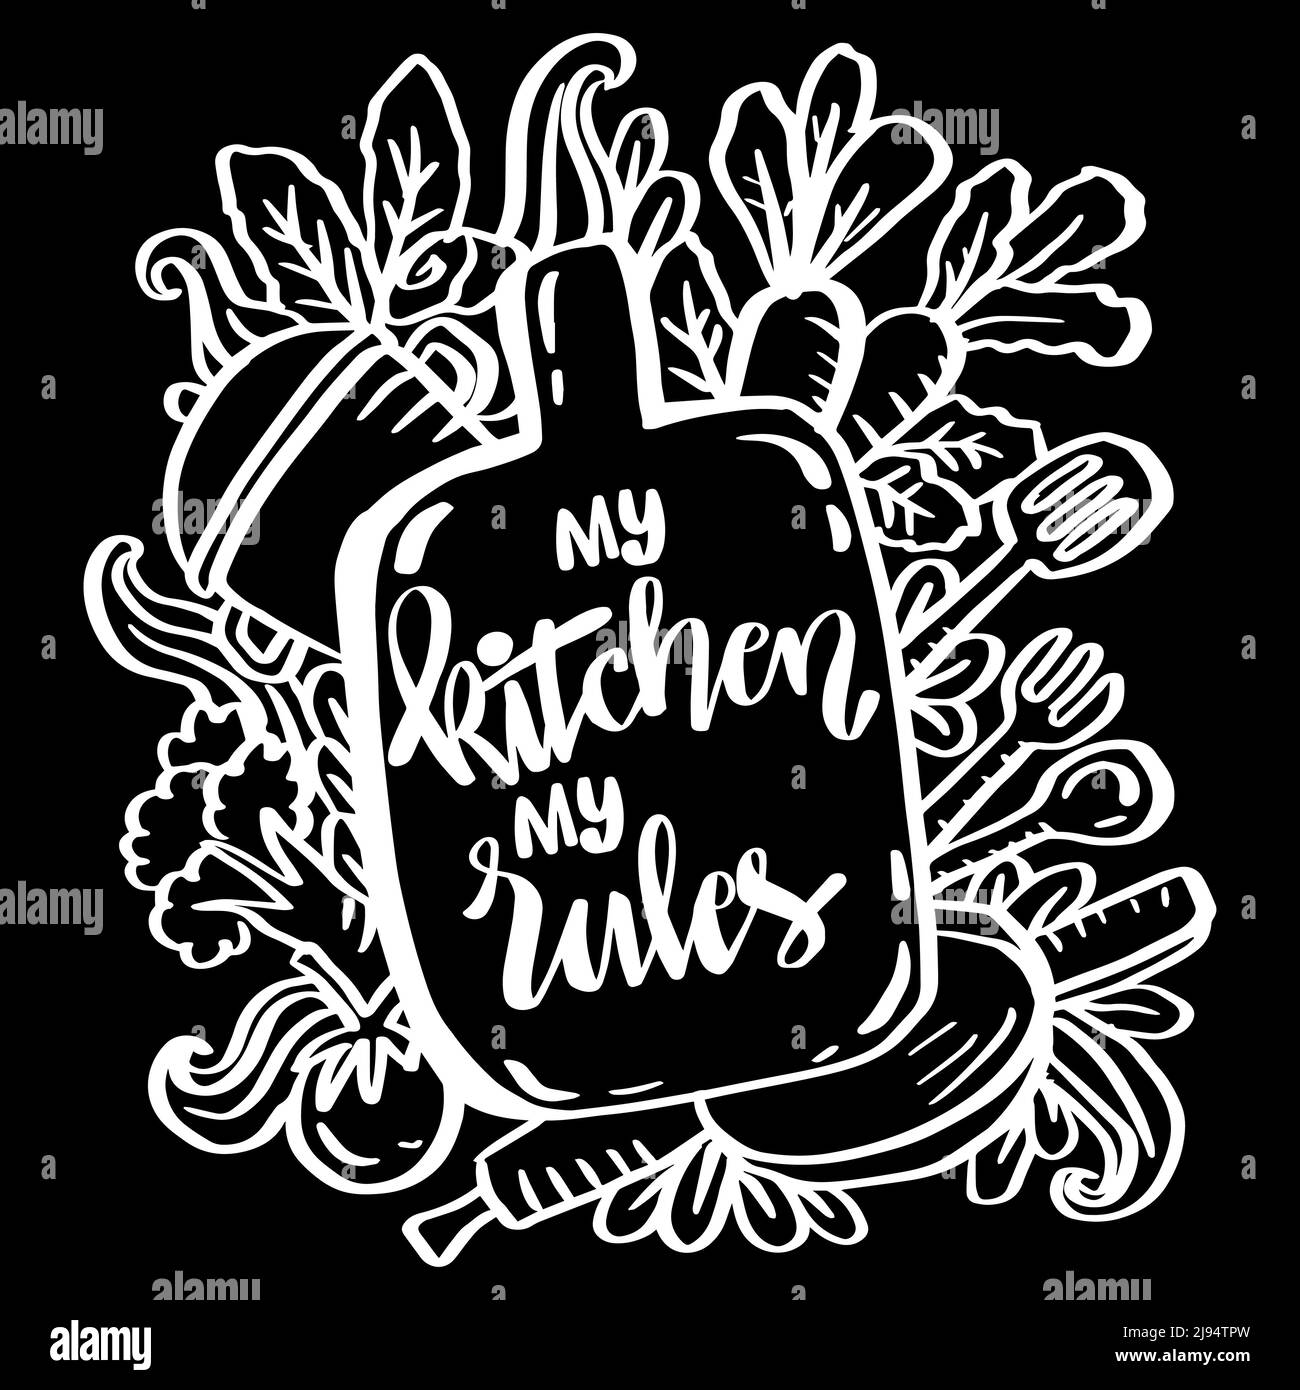 My kitchen my rules. Doodle poster Quotes. Stock Photo